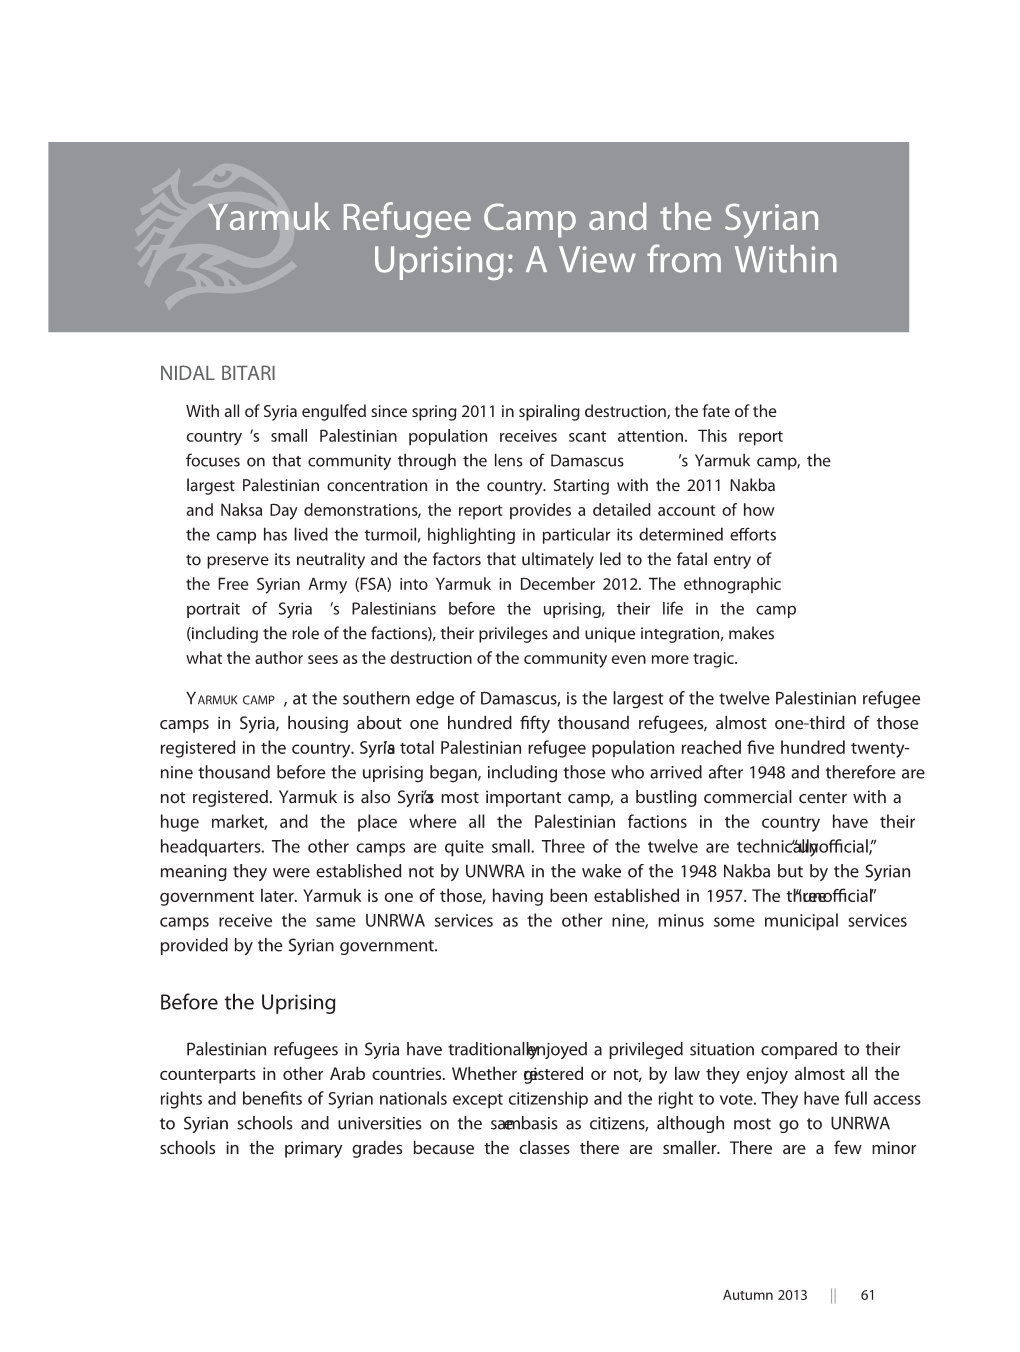 Yarmuk Refugee Camp and the Syrian Uprising: a View from Within